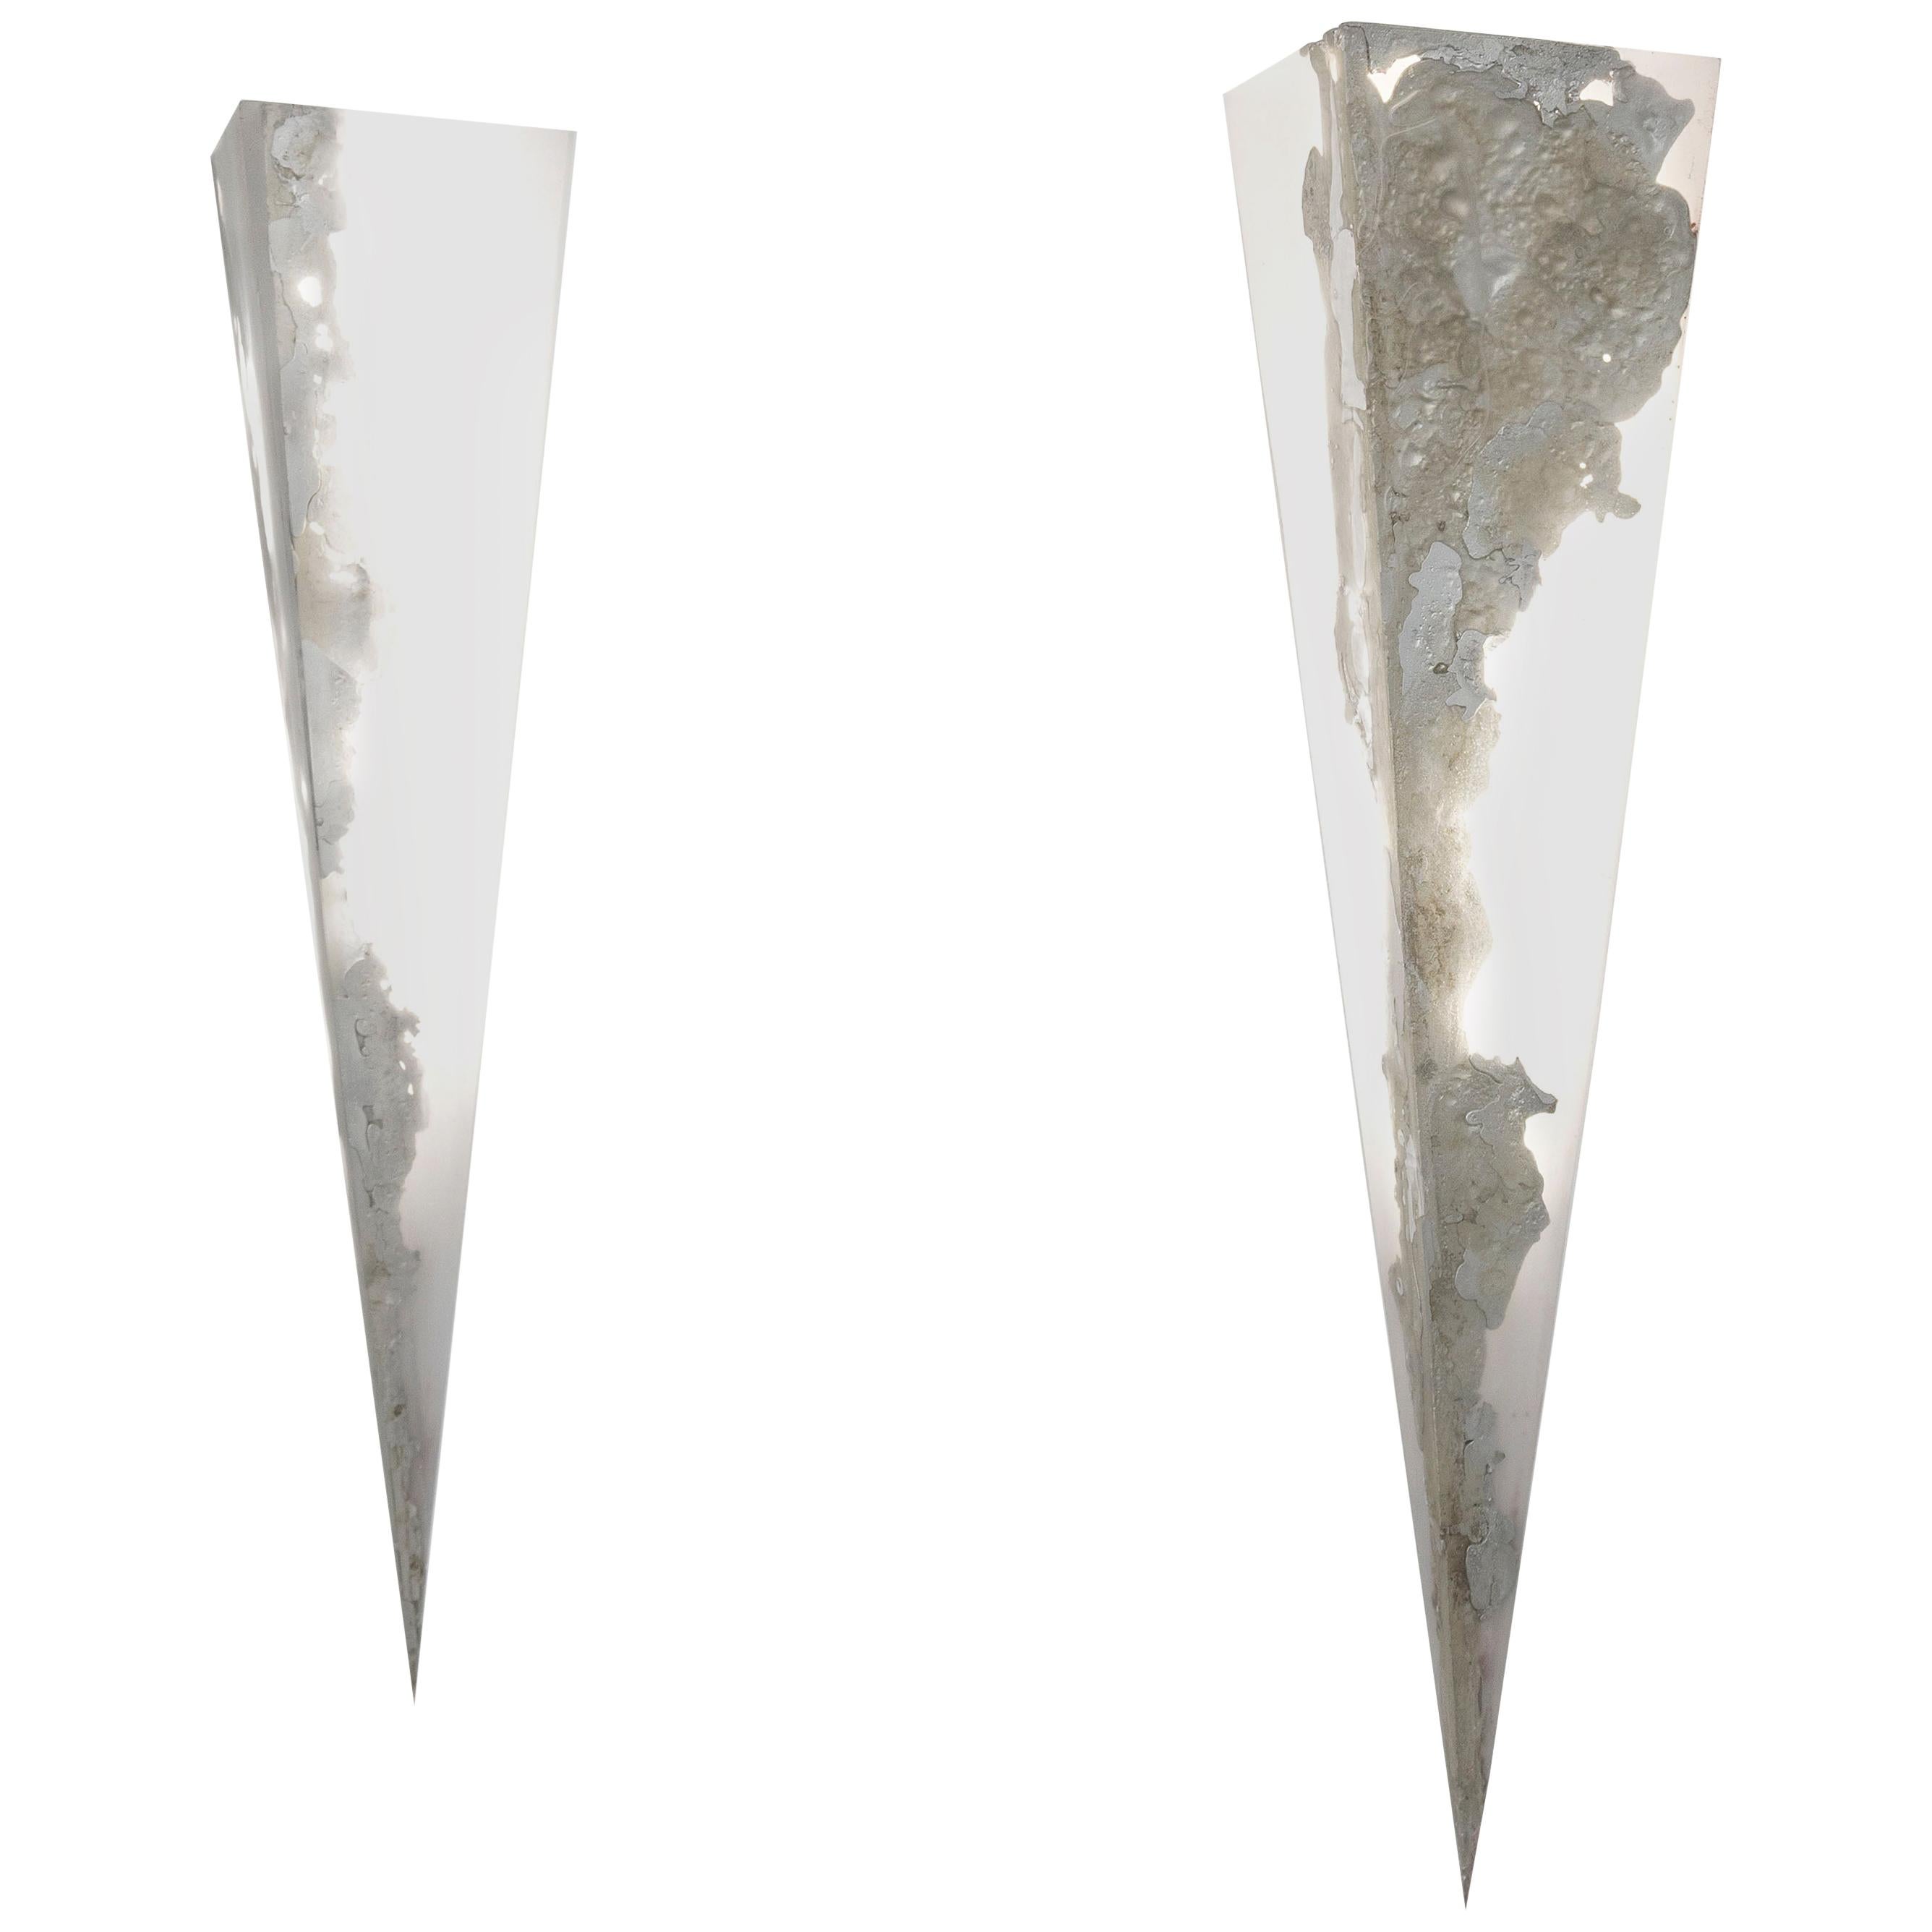 Prism Wall Sconce (Single) by Amanda Richards, Represented by Tuleste Factory